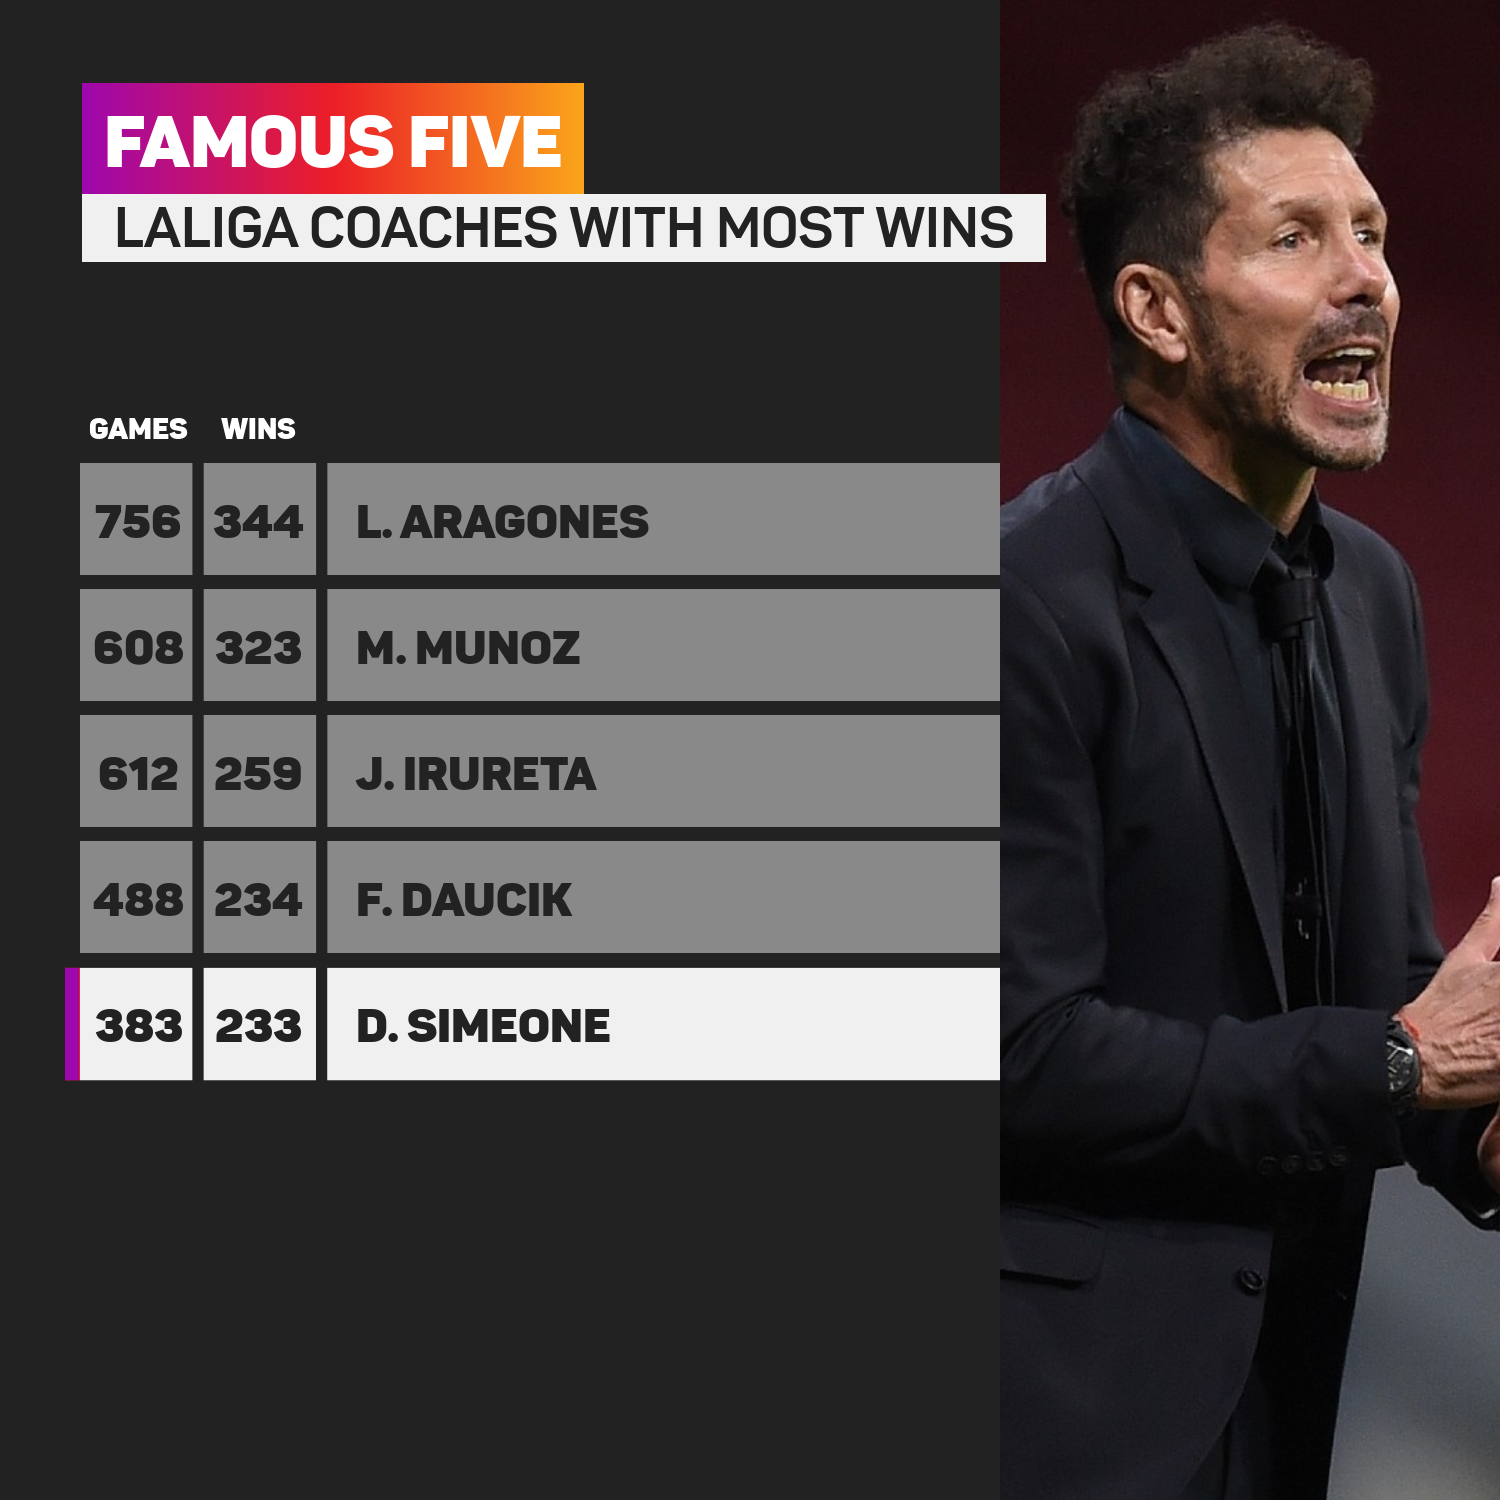 Diego Simeone is fifth among LaLiga coaches with the most wins